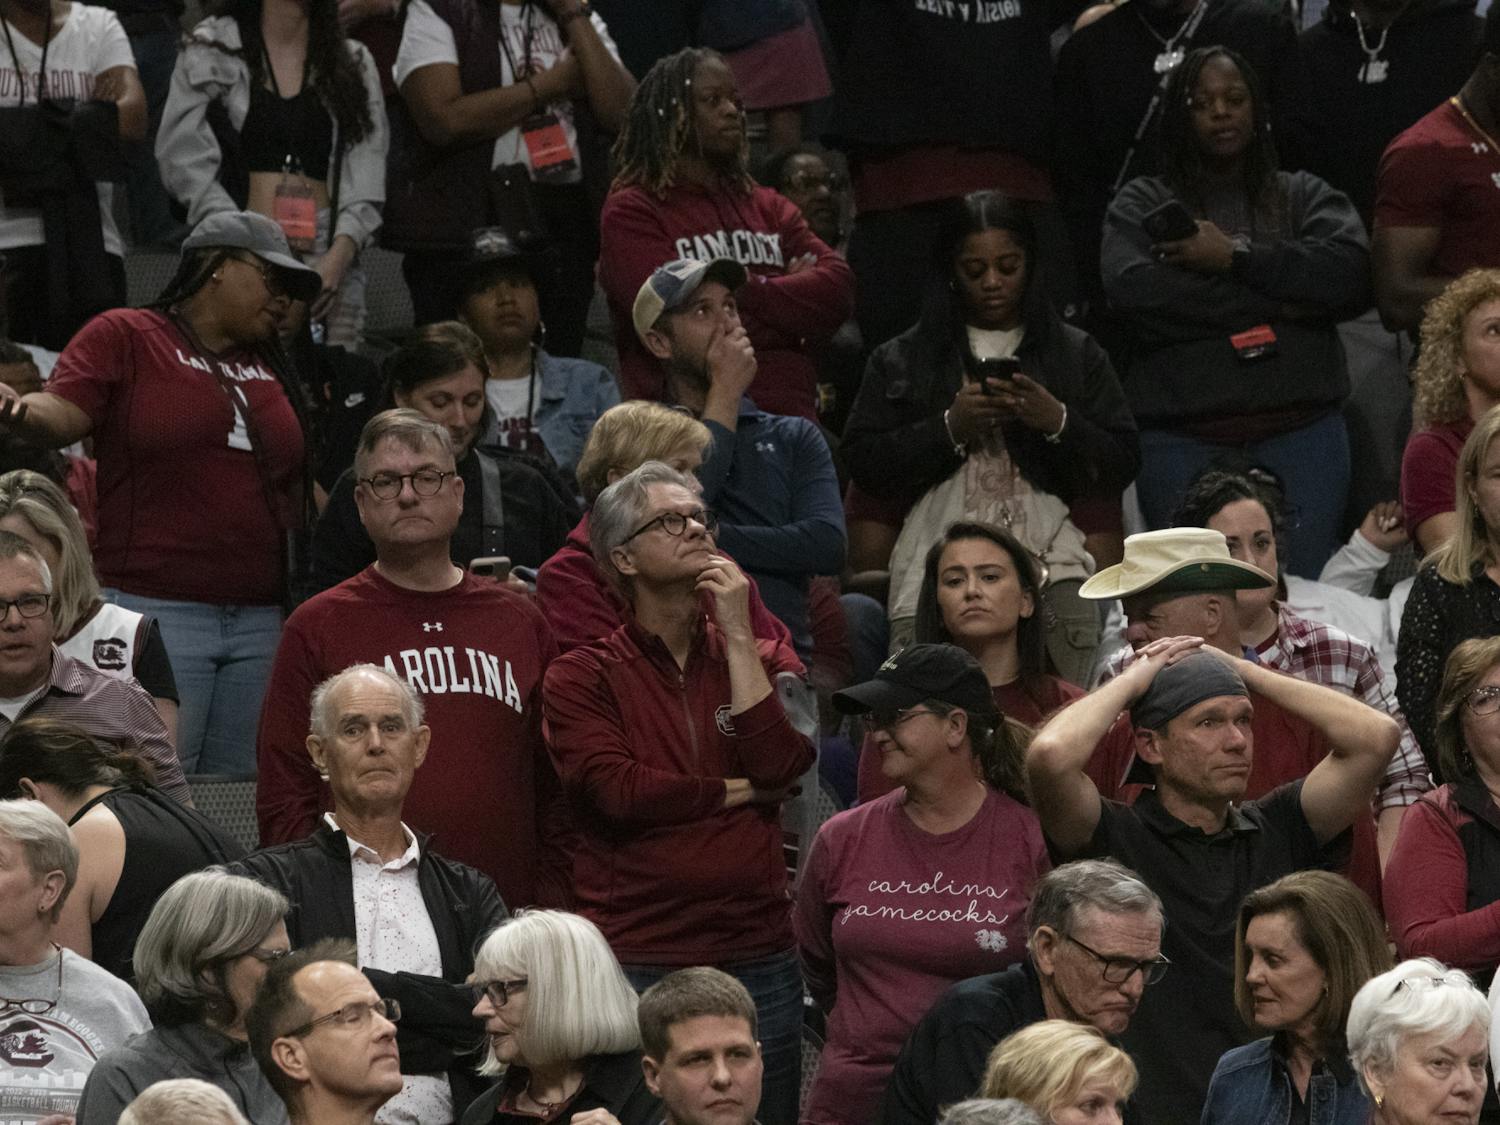 The South Carolina fan section expresses distress with Iowa being up by 4 points with 35 seconds left in the fourth quarter of the Final Four matchup on March 31, 2023. The Gamecocks managed to get the game within 2 points with 10 seconds left, but the Hawkeyes would secure the win with the help of Clark’s free throws.